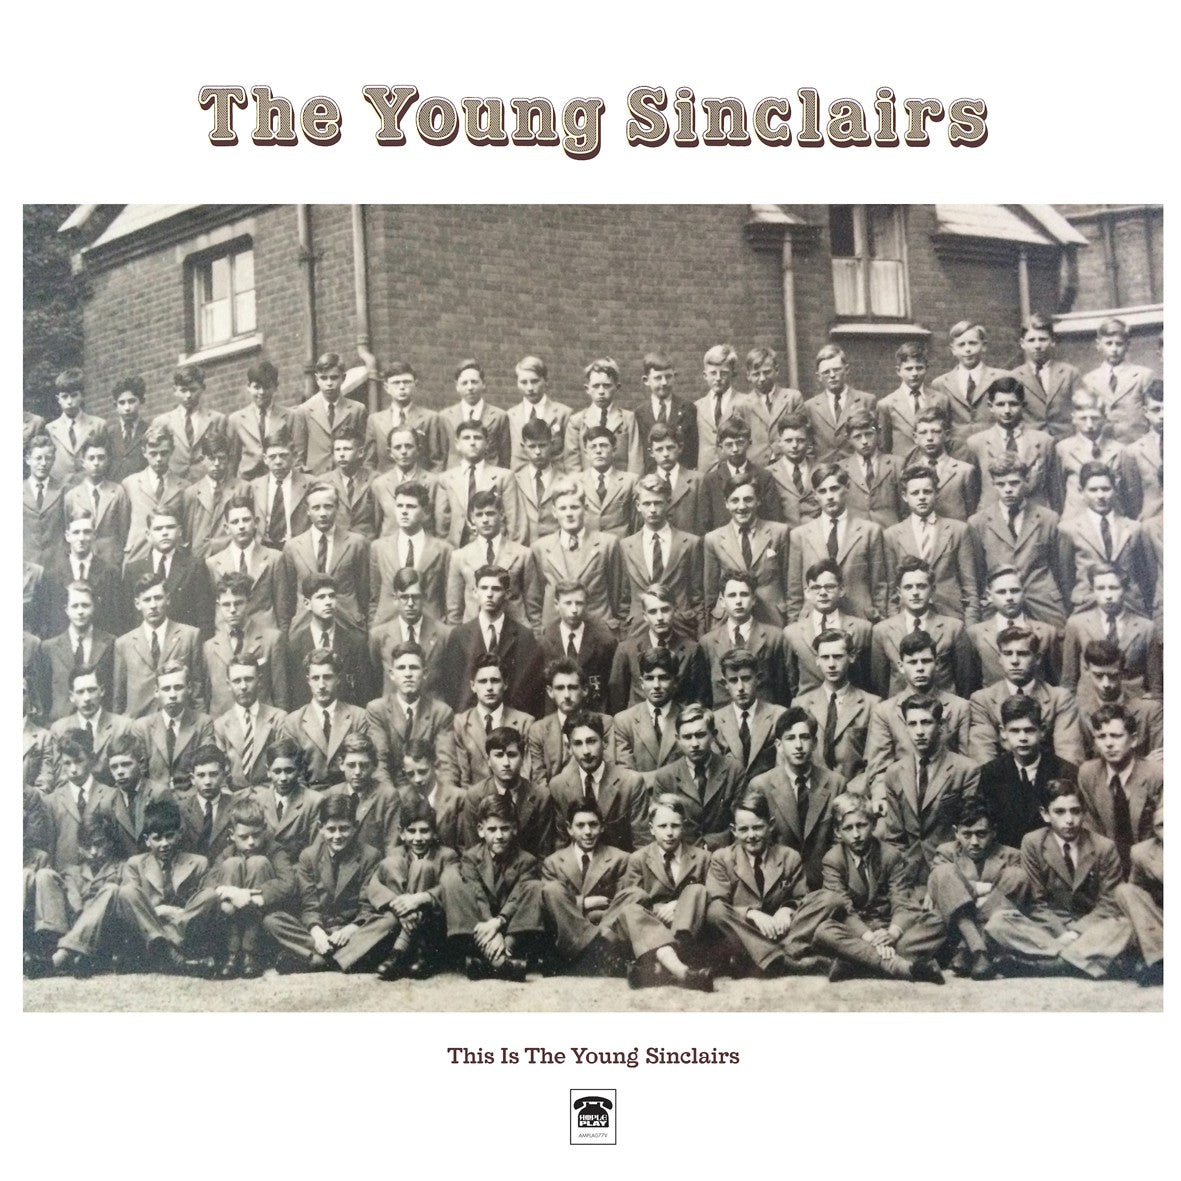 The Young Sinclairs 'This is the Young Sinclairs' – album